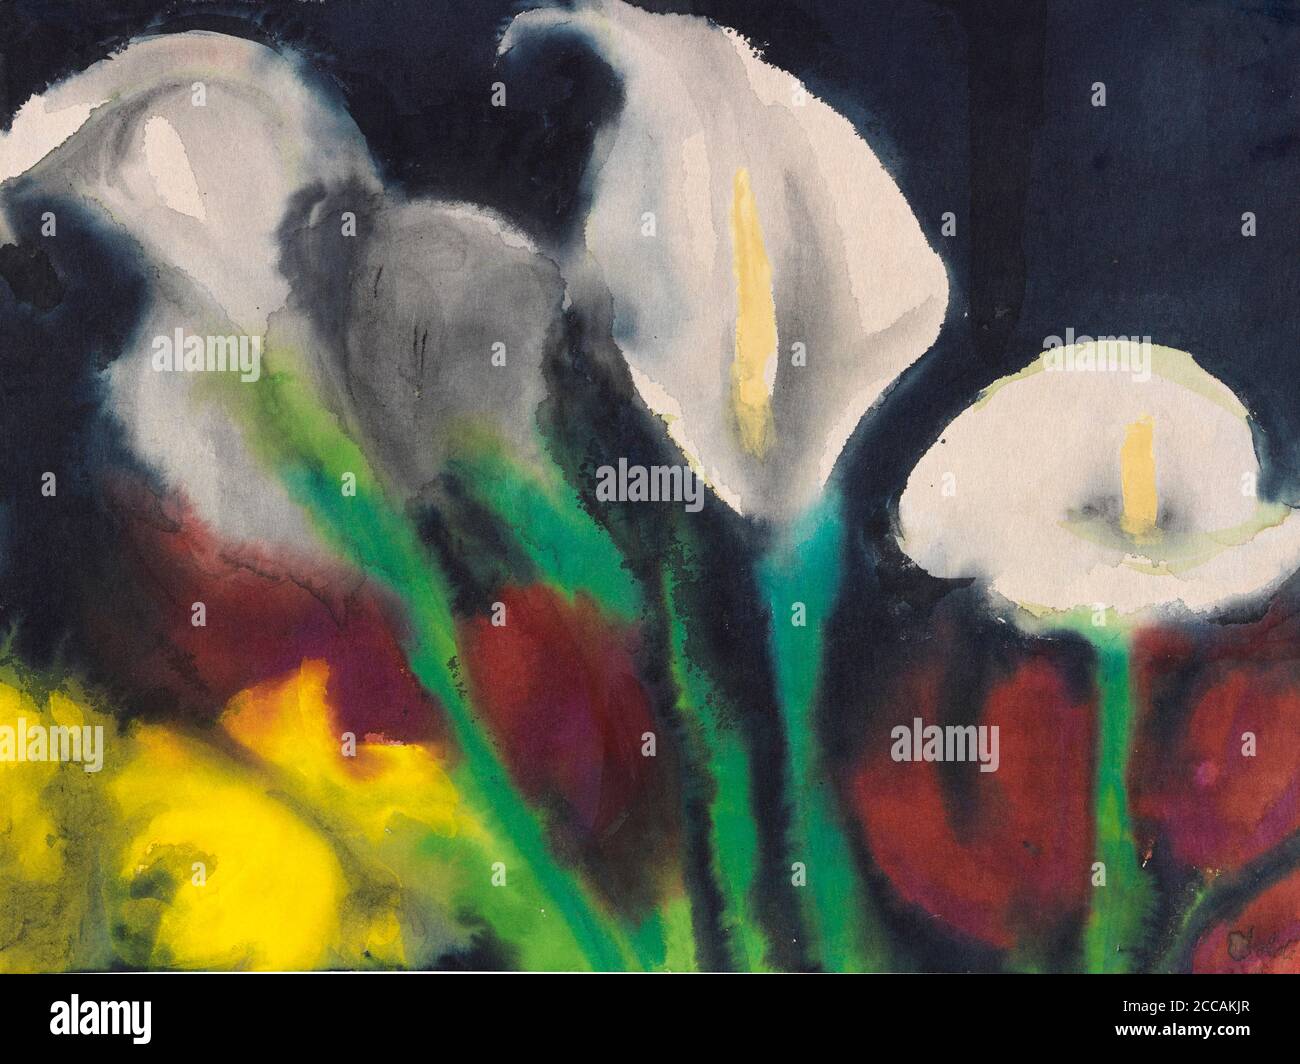 White calla lilies over red and yellow flowers. Museum: PRIVATE COLLECTION. Author: EMIL NOLDE. Stock Photo